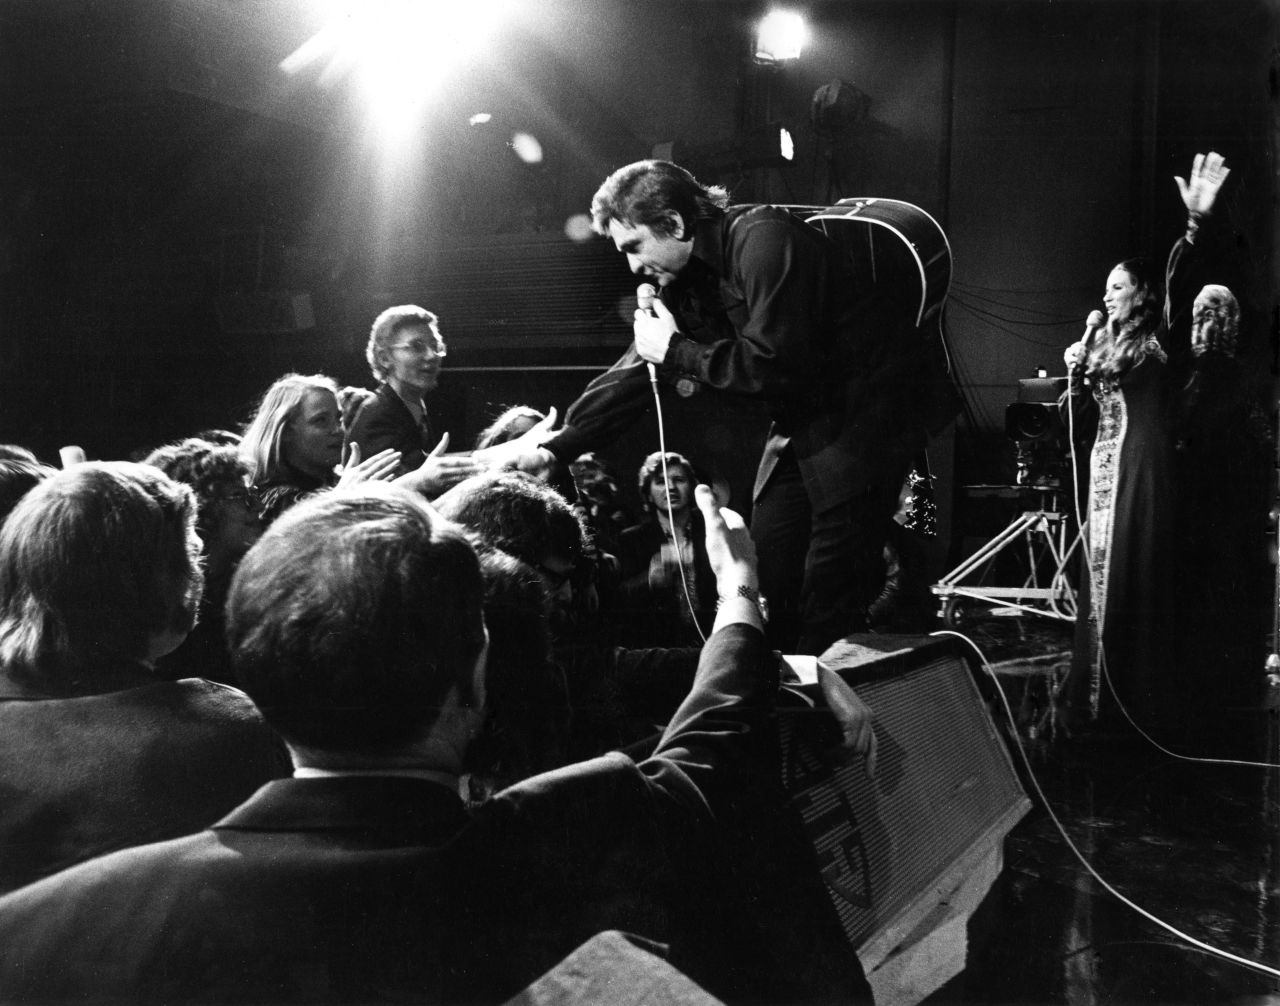 Cash performs live with June Carter Cash in Amsterdam, Netherlands, in 1972.